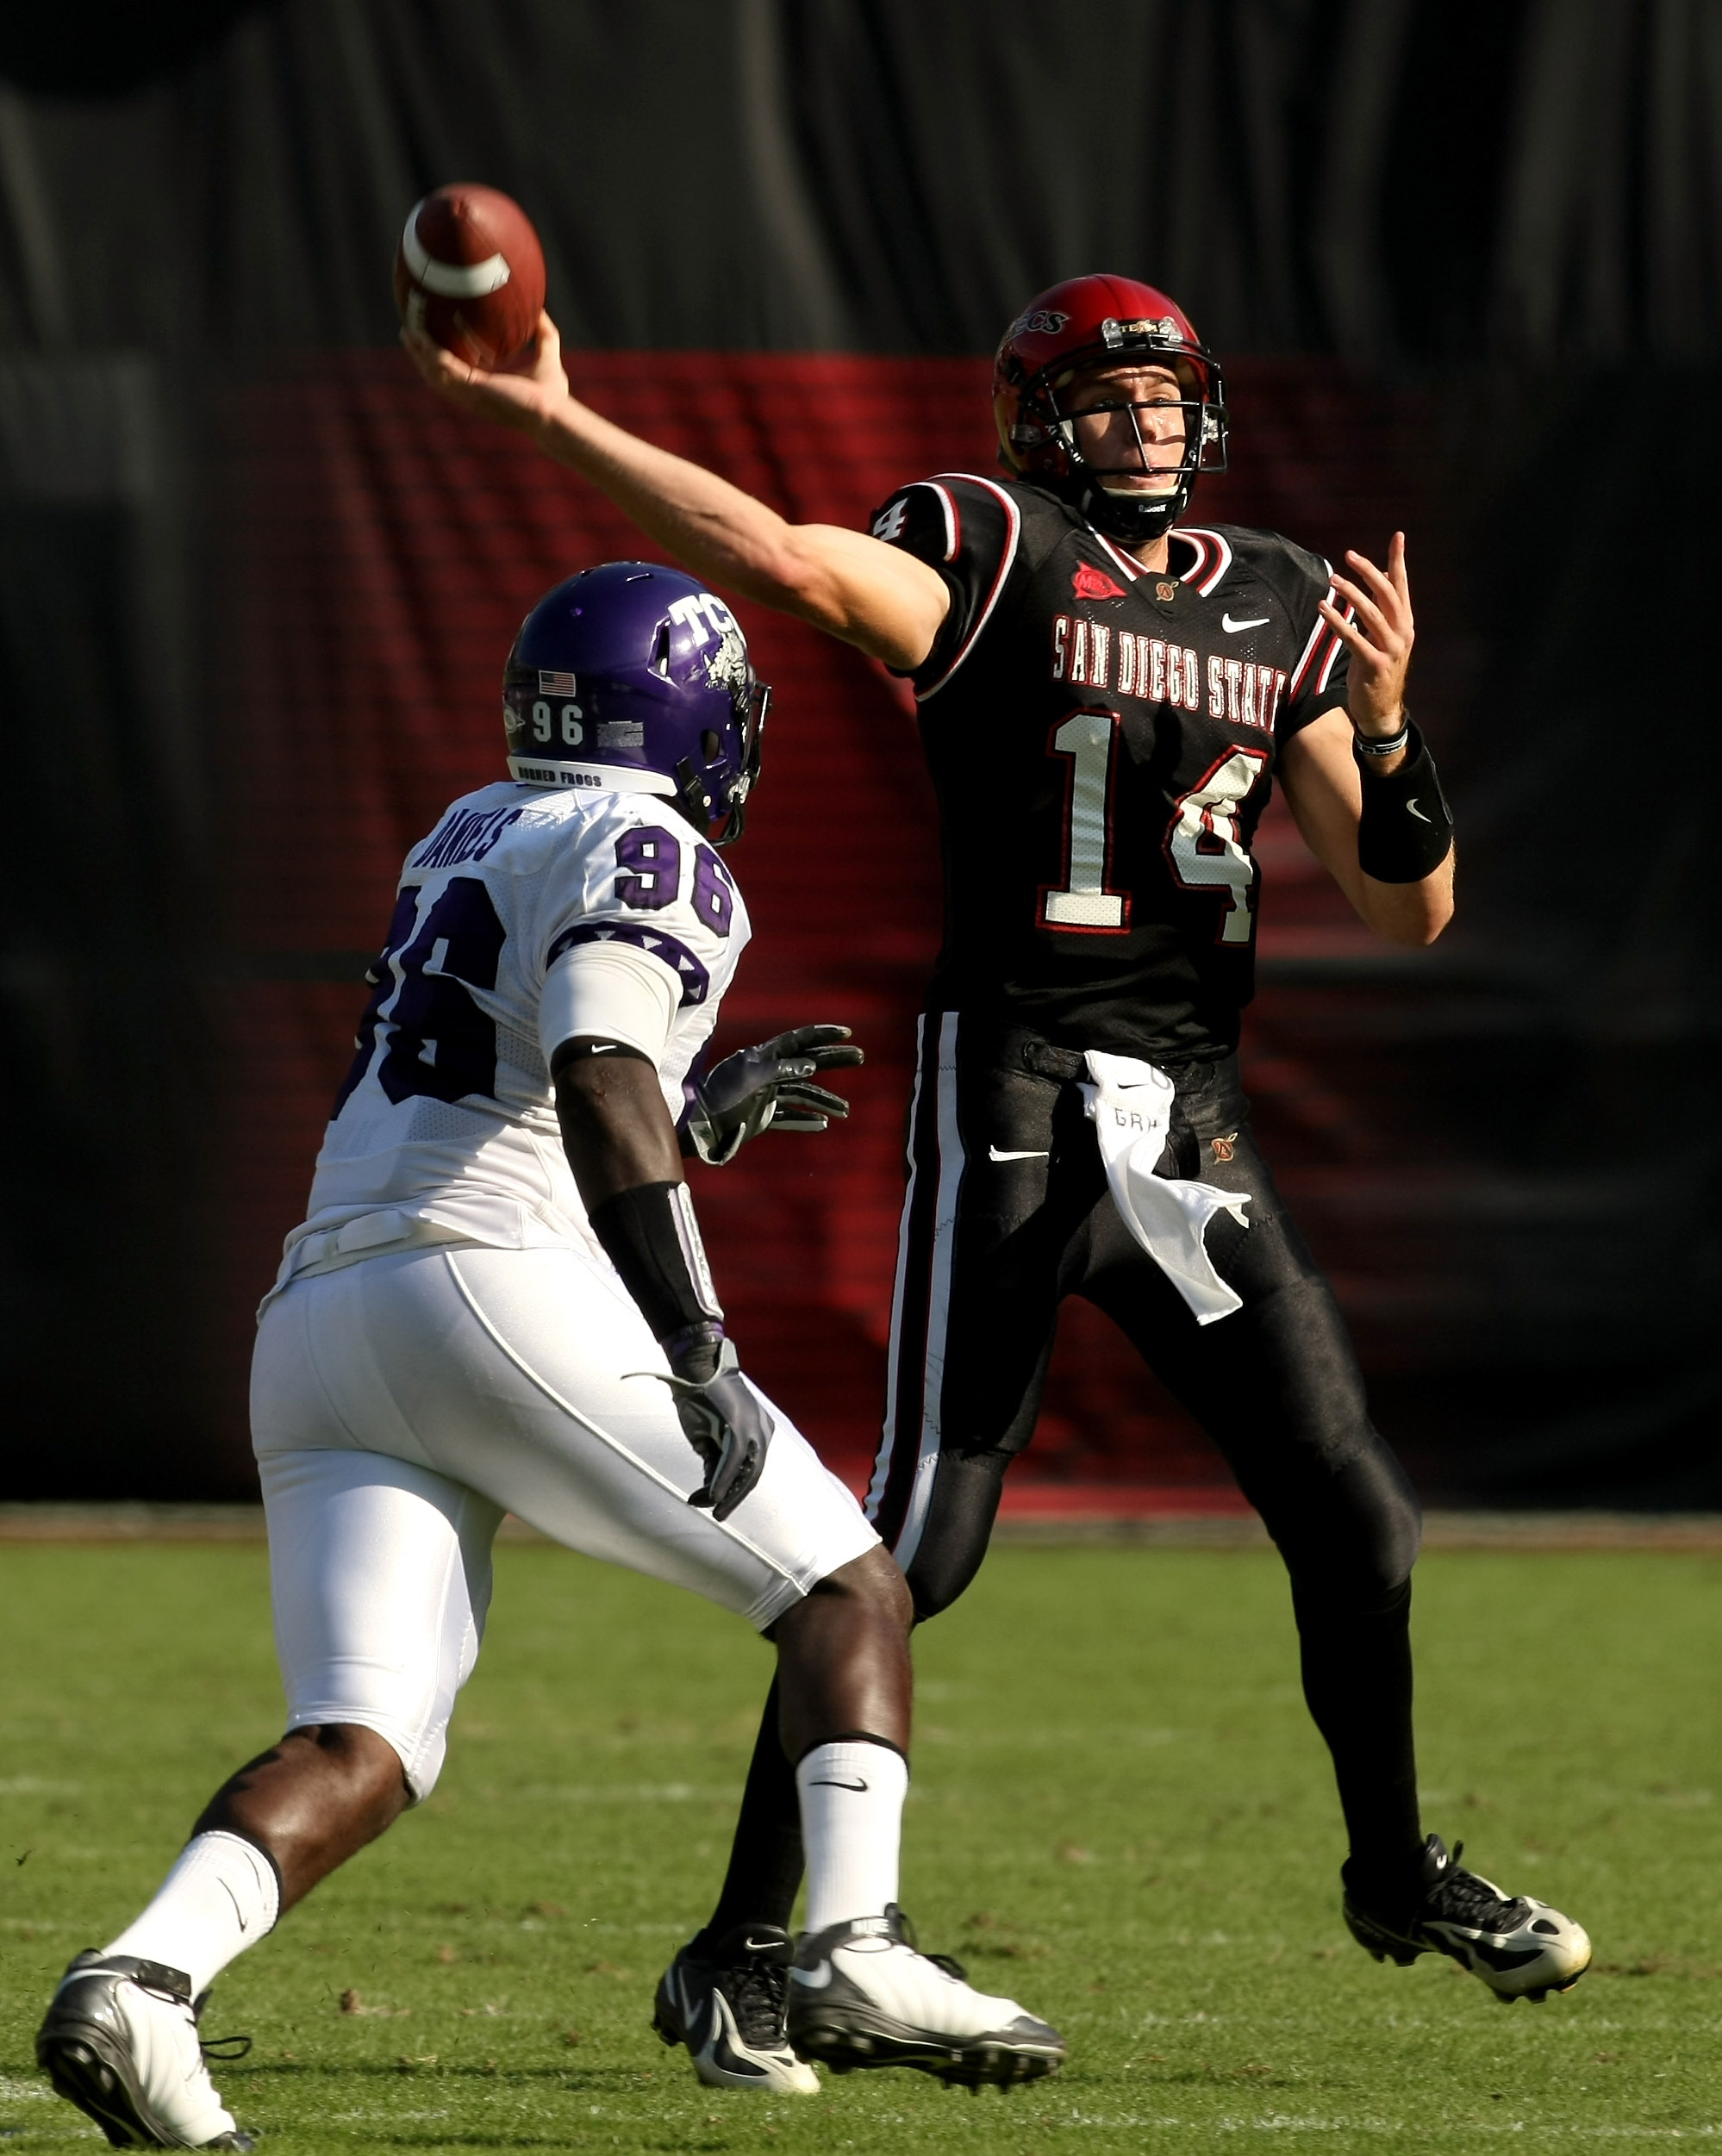 SAN DIEGO - NOVEMBER 7:  Quarterback Ryan Lindley #14 of the San Diego State Aztecs throws a pass over defensive end Wayne Daniels #96 of the Texas Christian University Horned Frogs on November 7, 2009 at Qualcomm Stadium in San Diego, California.    (Pho